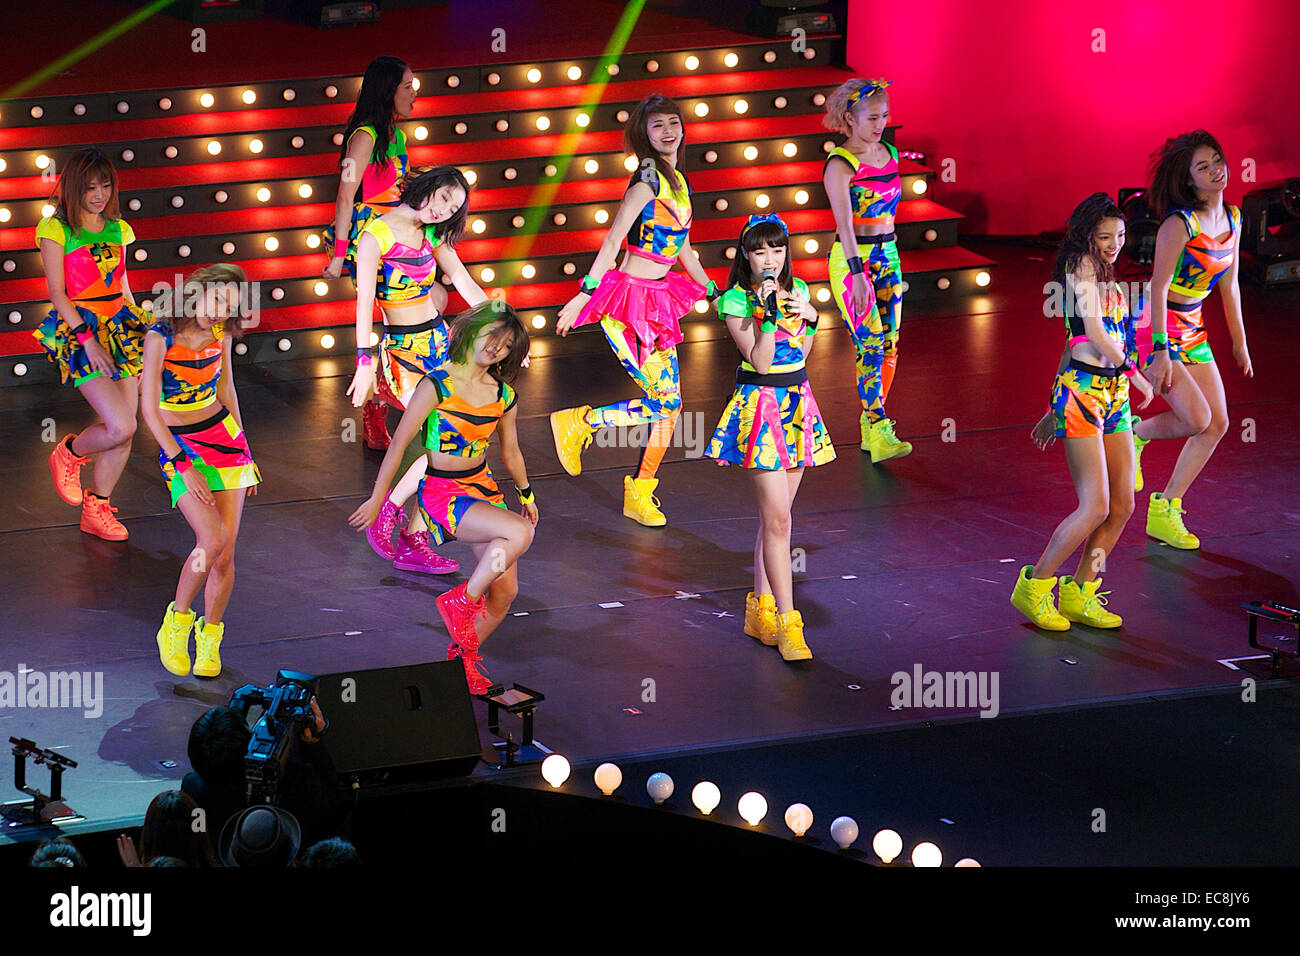 E Girls December 10 14 Tokyo Japan E Girls Performs At The Stock Photo Alamy